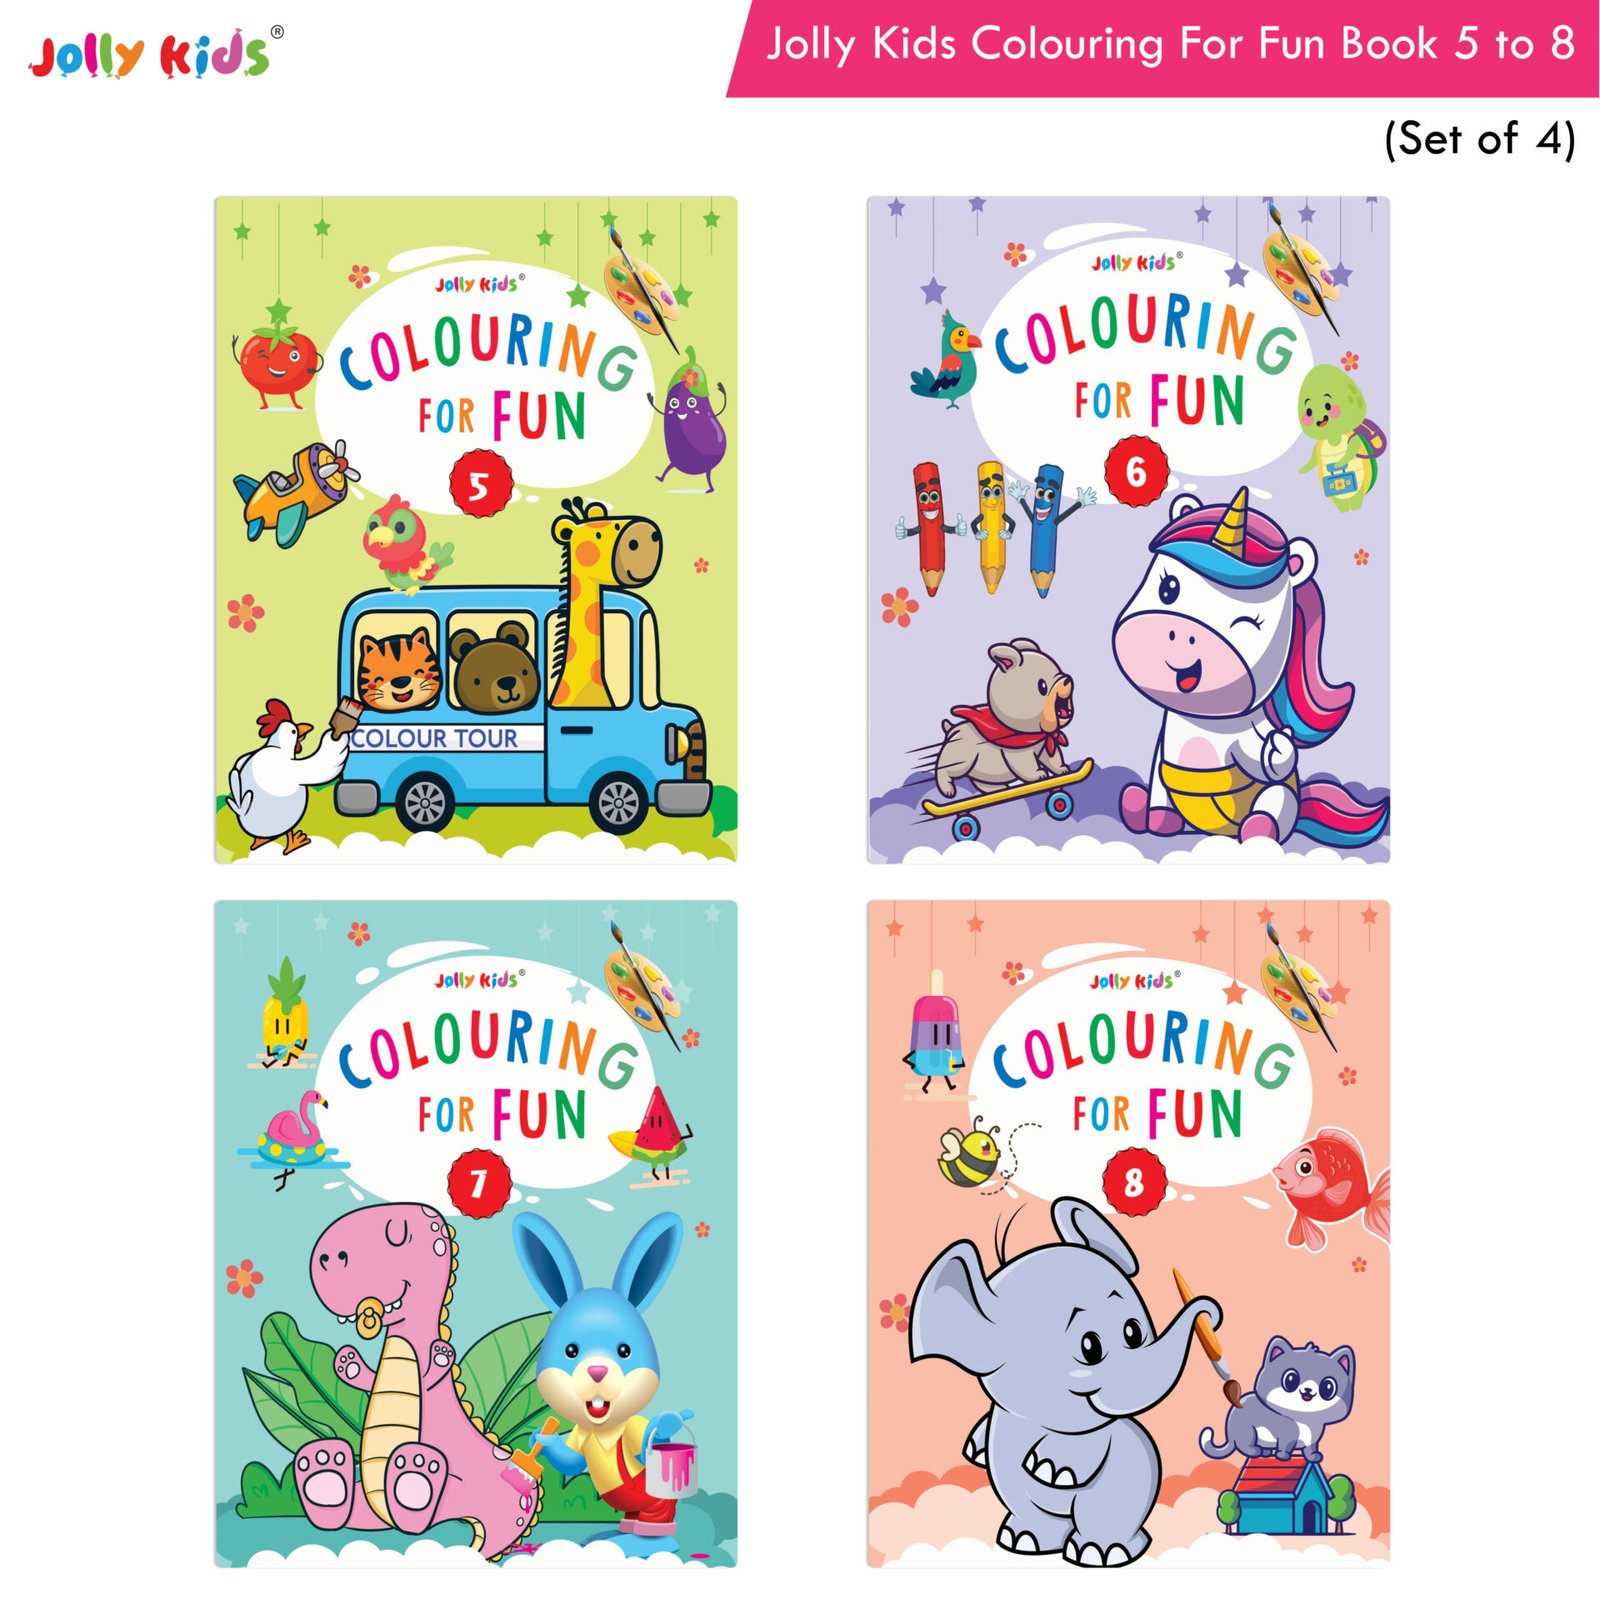 Jolly Kids Colouring For Fun Book Set of 4 5 8 1